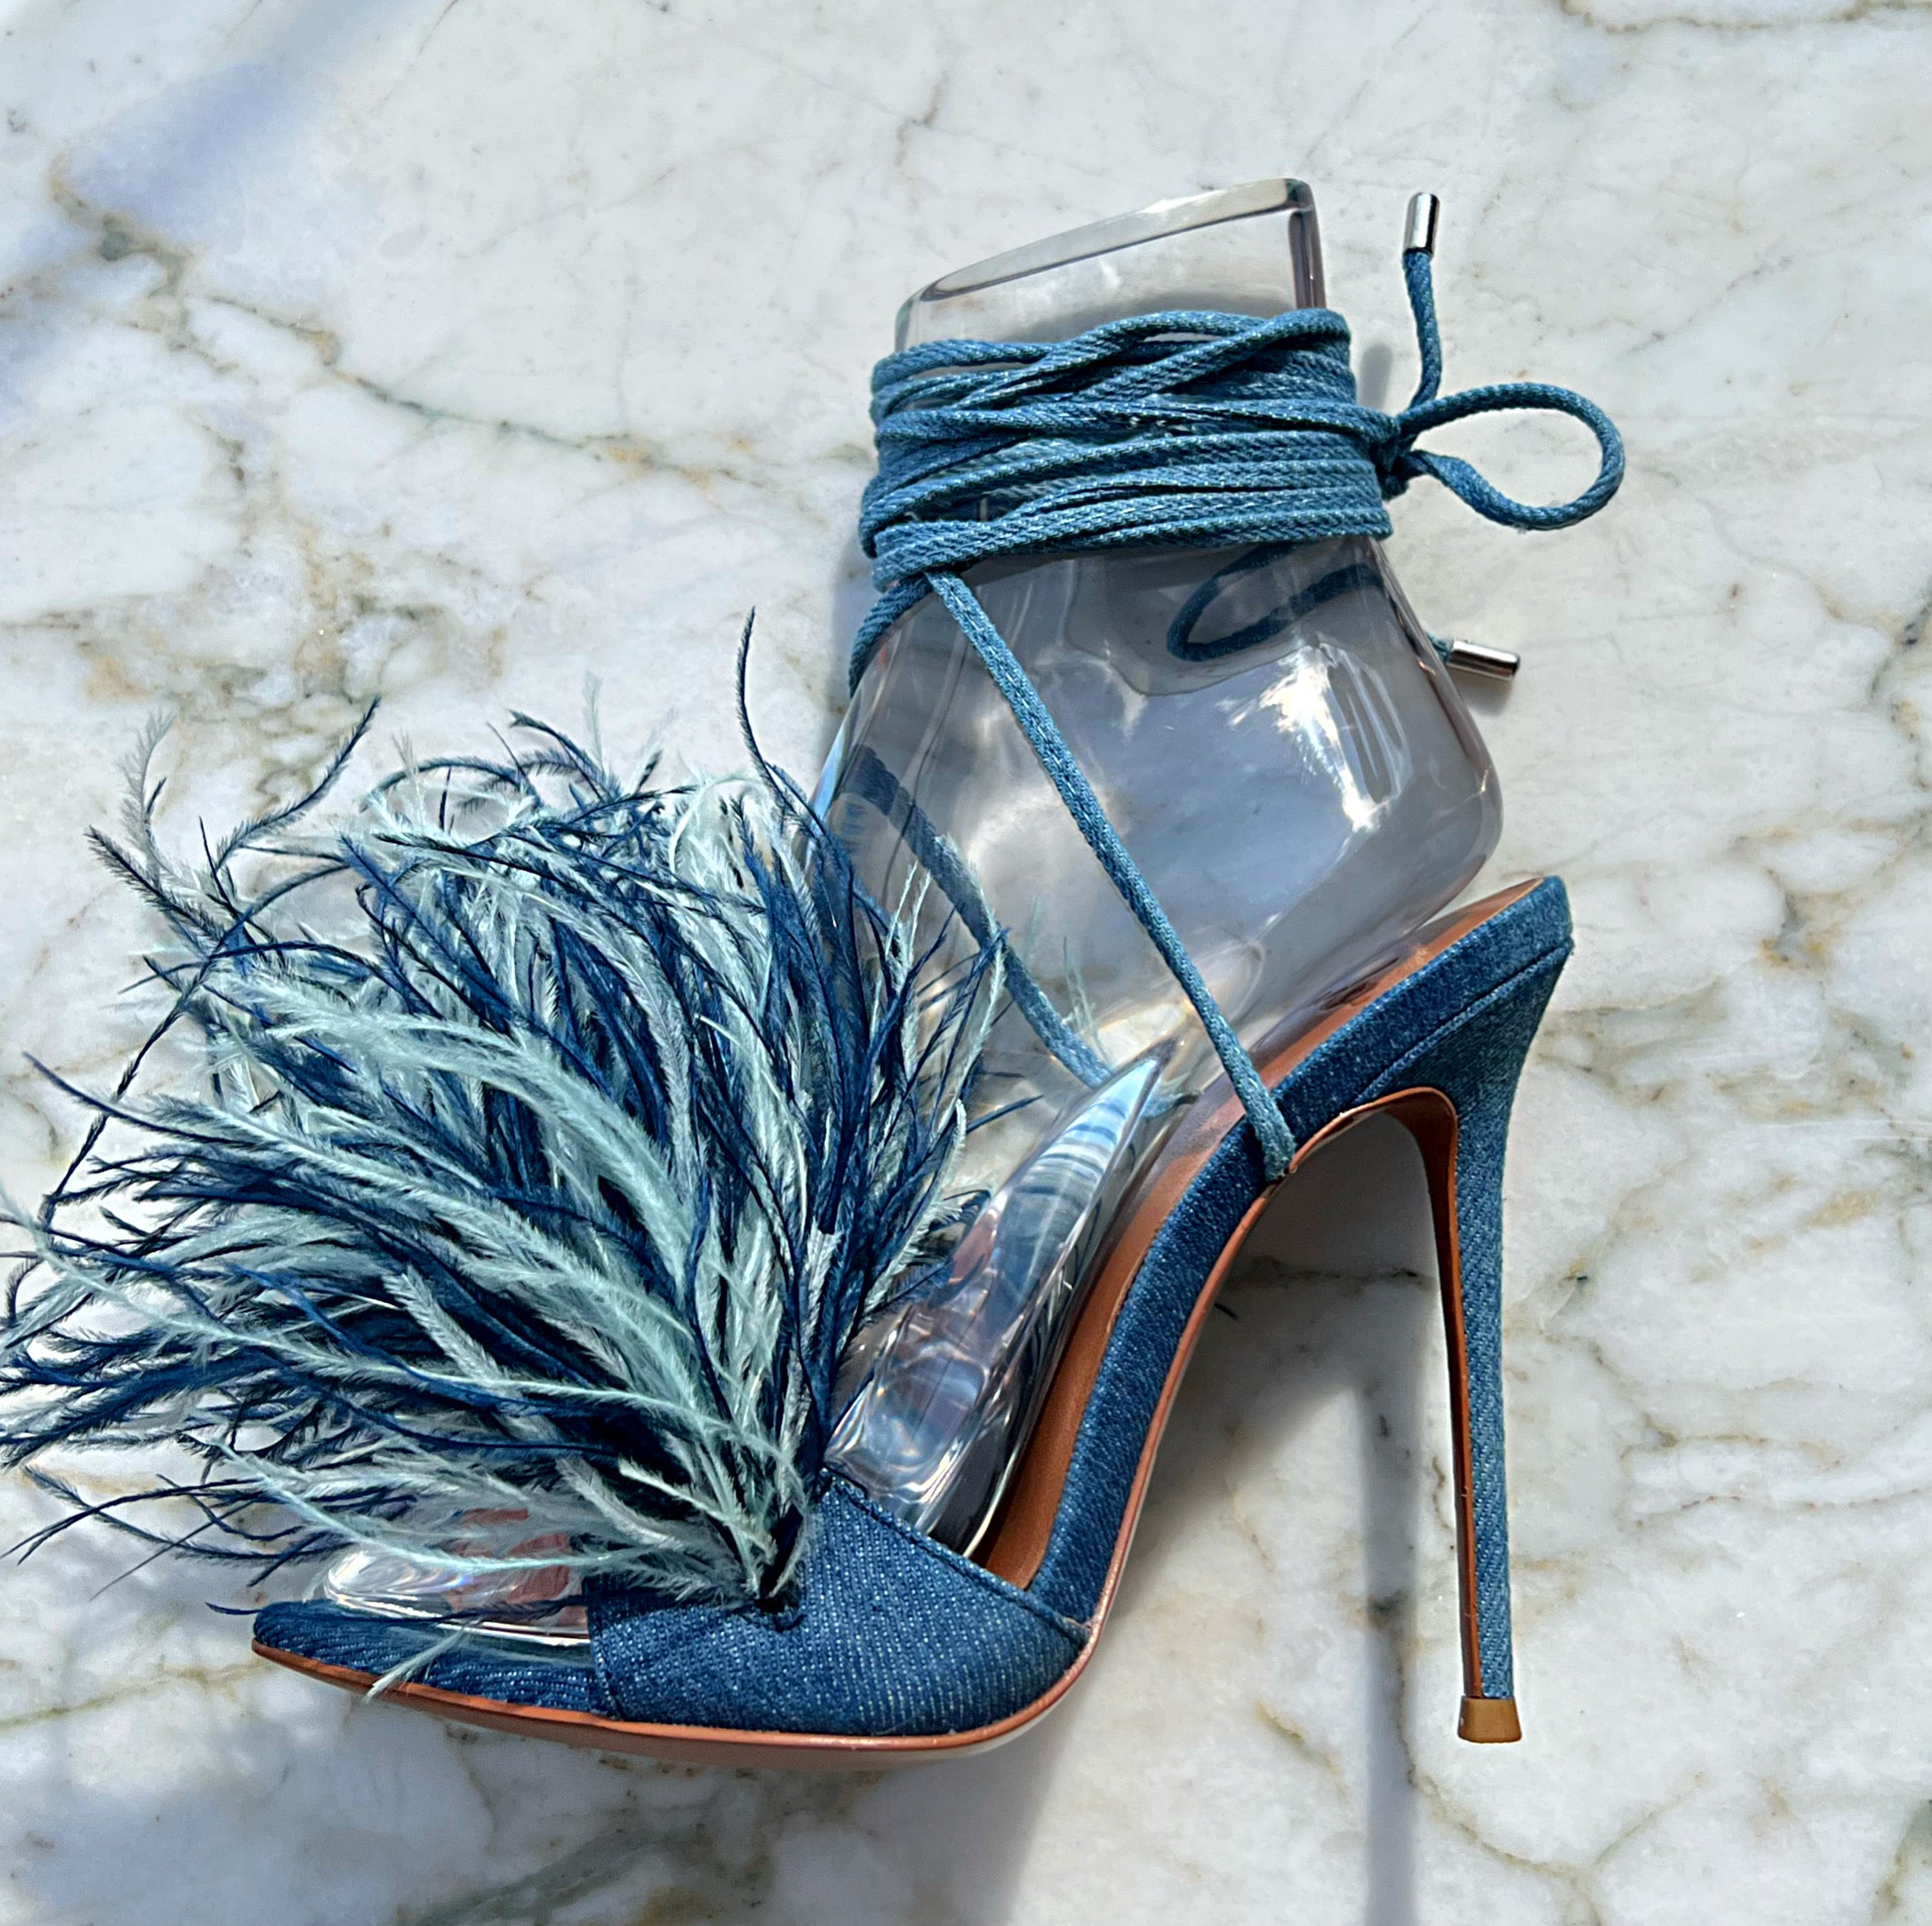 STAUD Anise feather-trimmed satin sandals | NET-A-PORTER